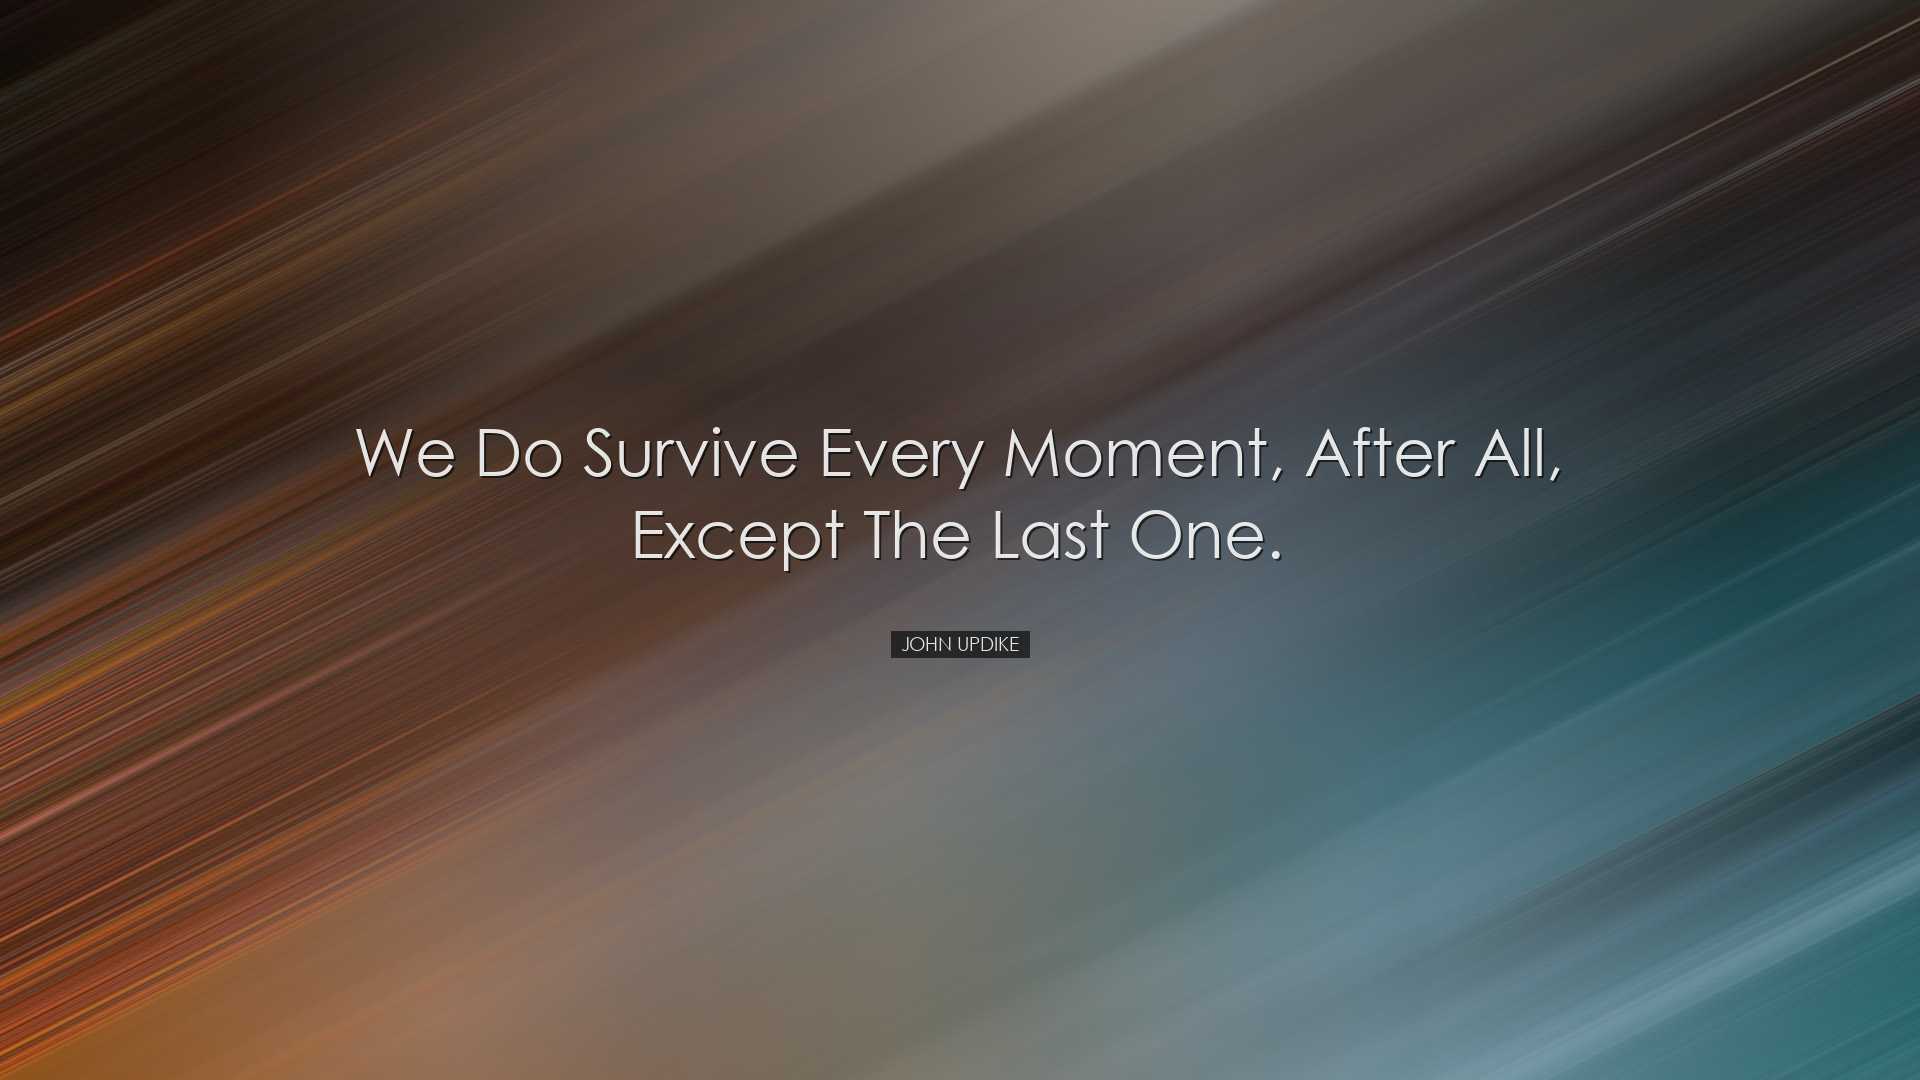 We do survive every moment, after all, except the last one. - John